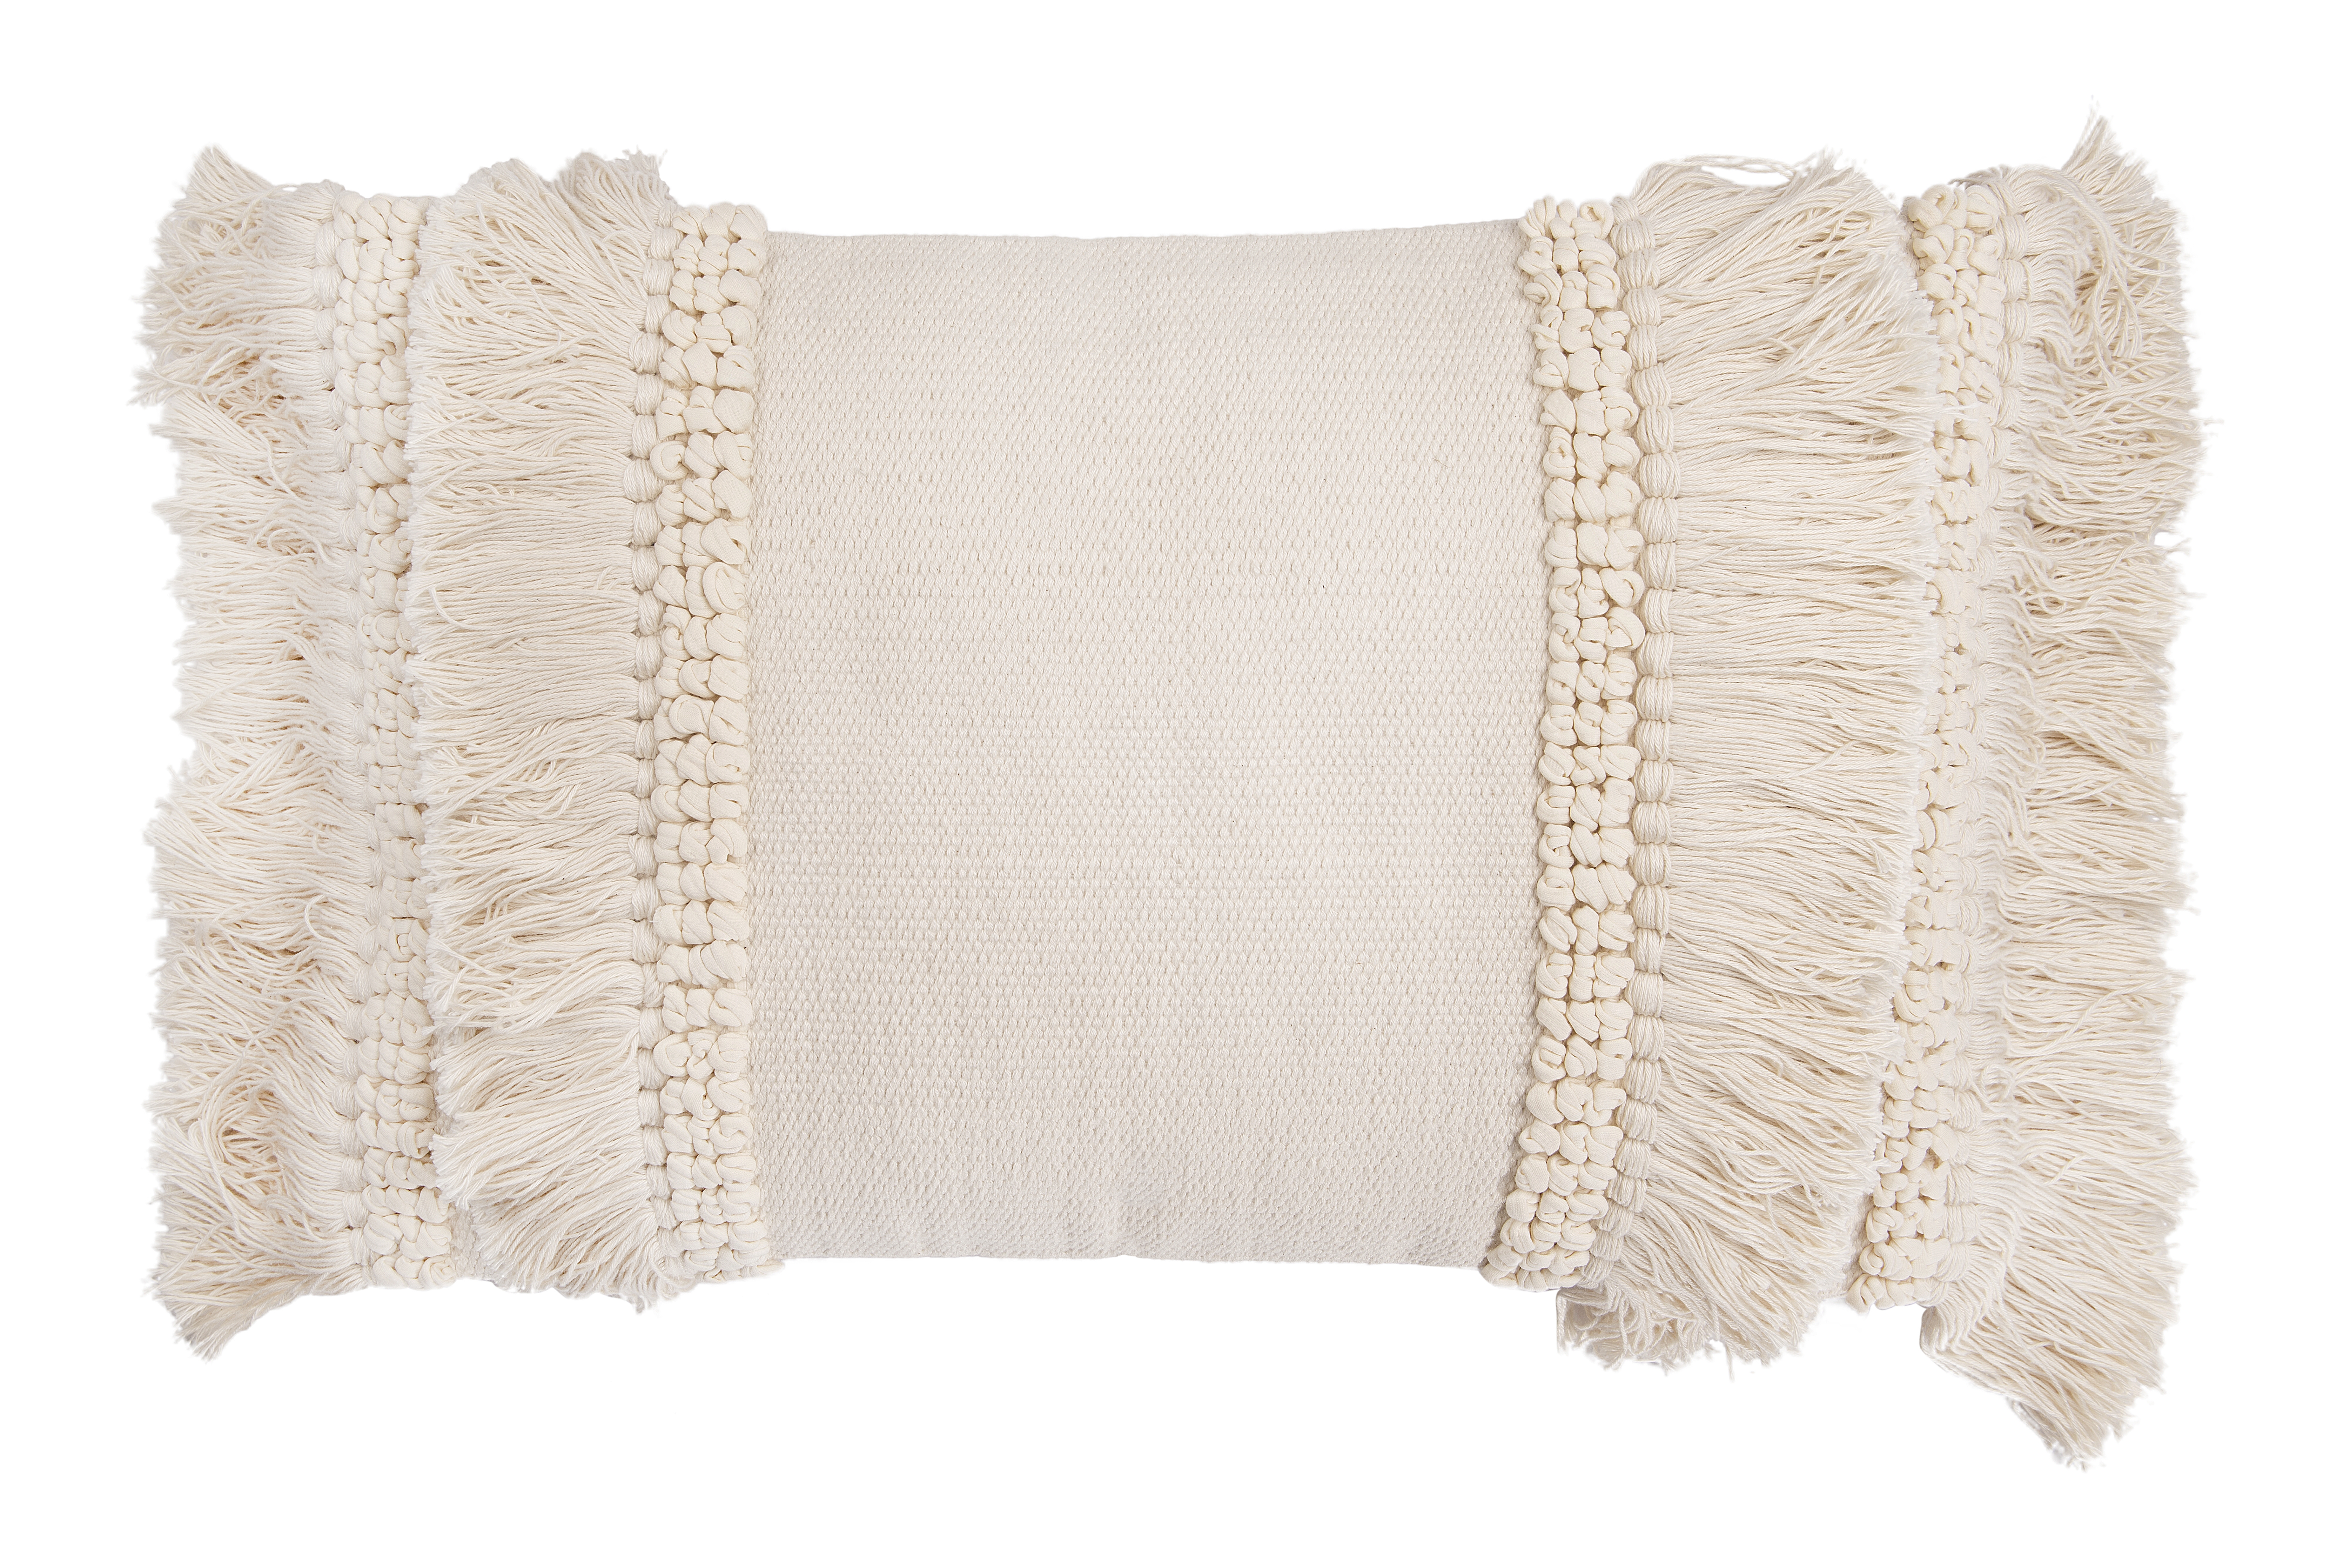 Cream Cotton & Chenille Woven Lumbar Pillow with Long Fringe - Nomad Home